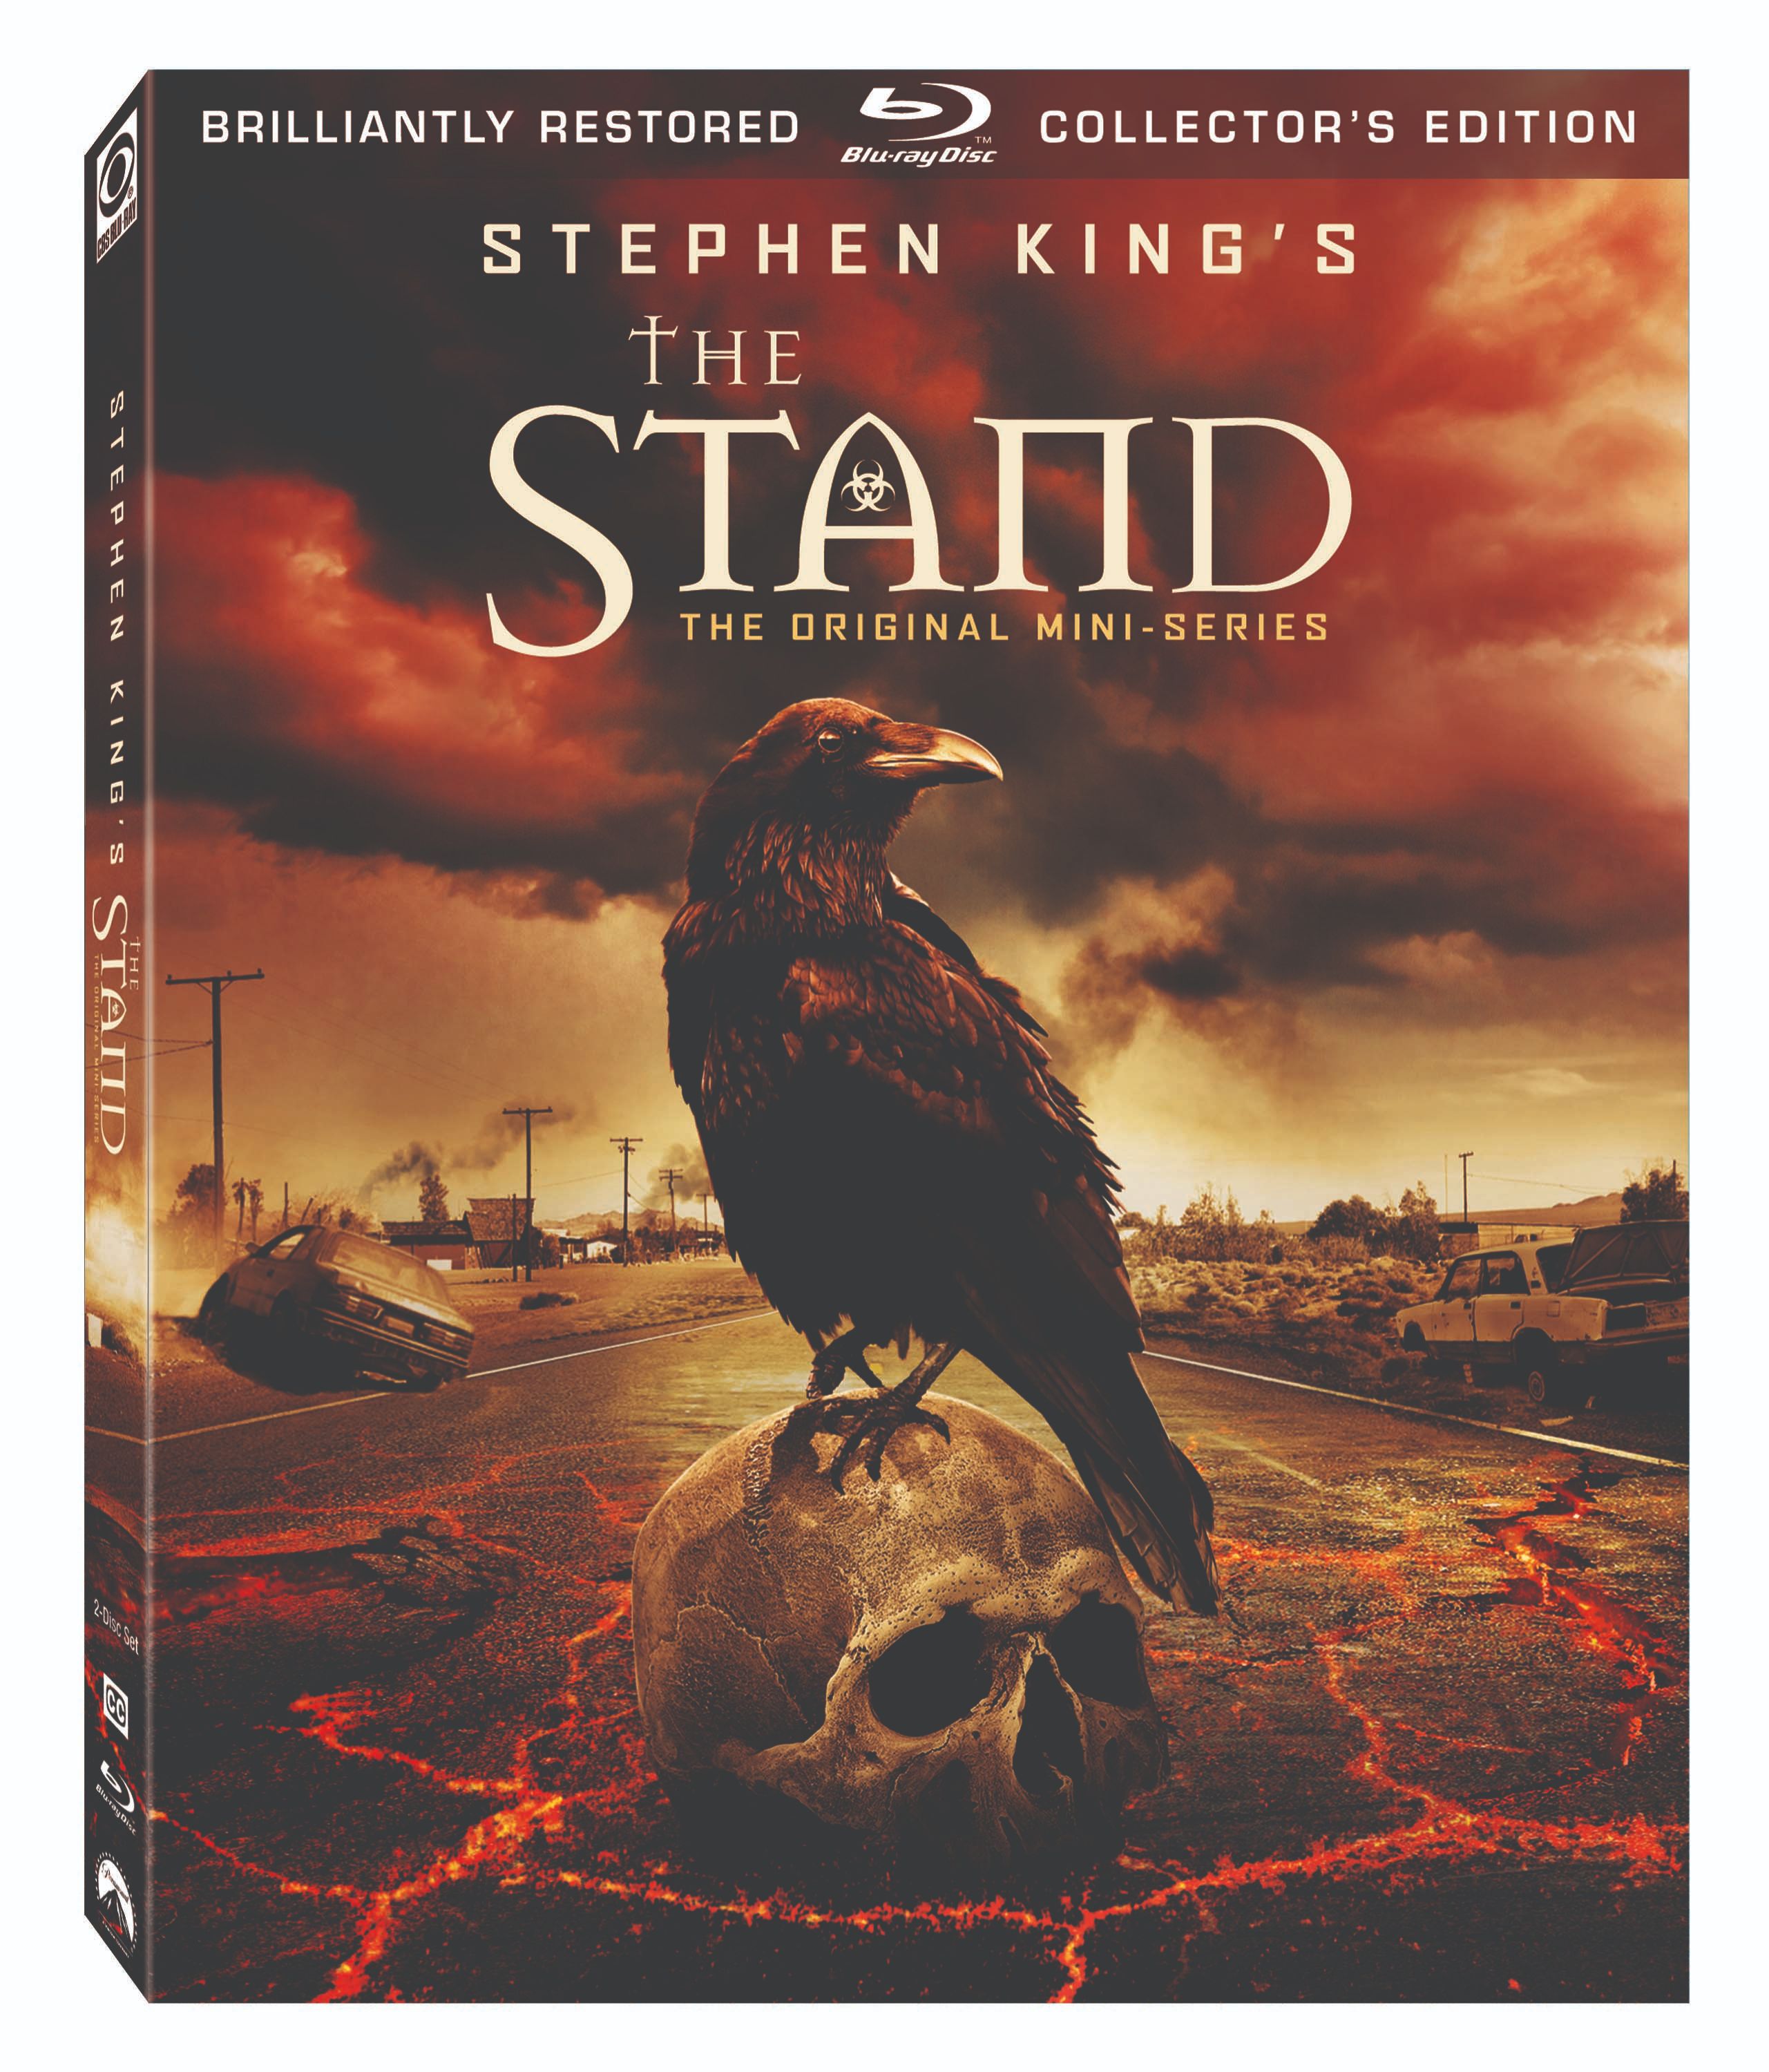 The Stand 1994 blu-ray cover